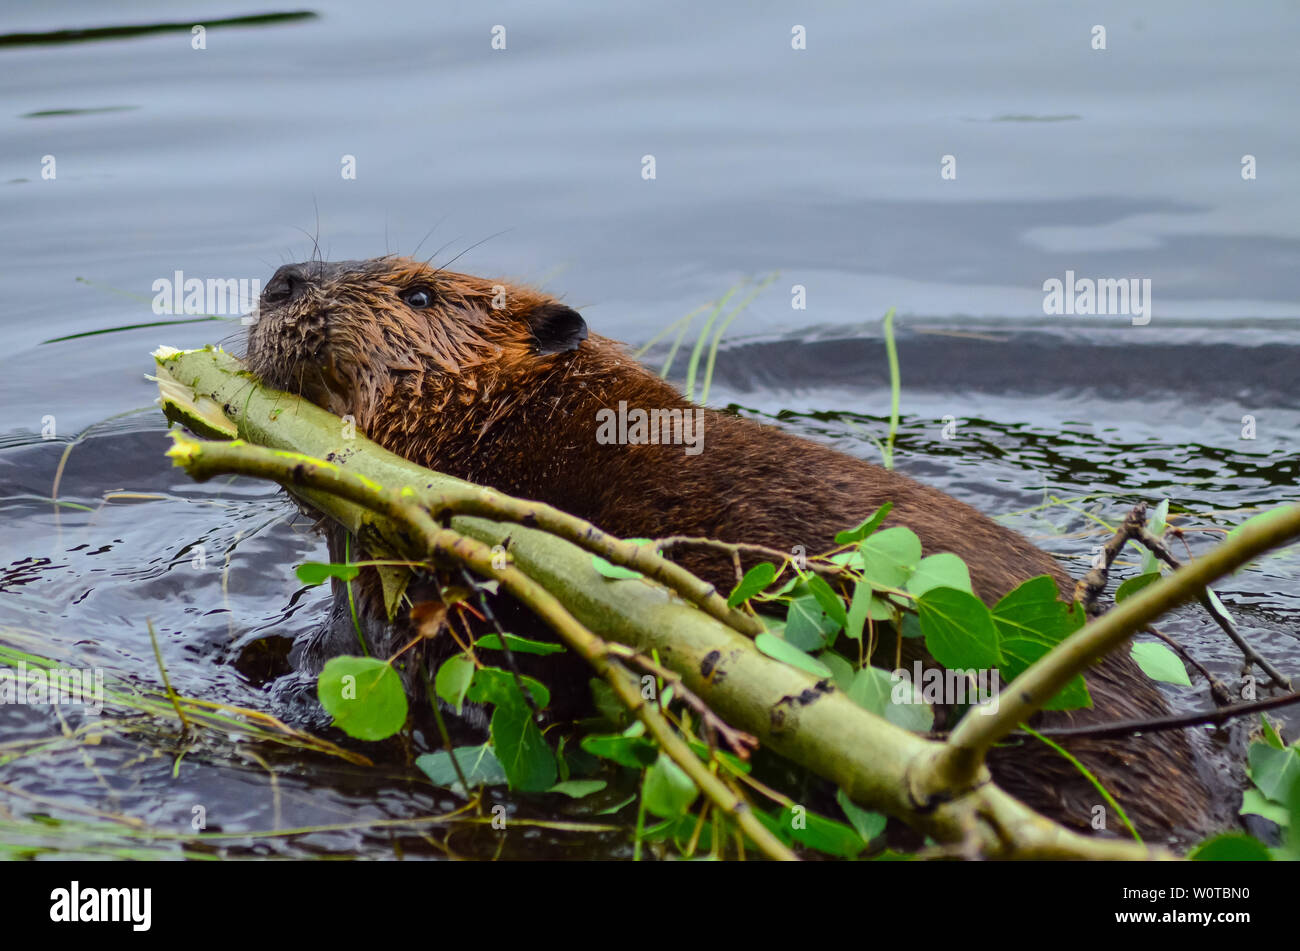 Closeup photo of beaver carrying a branch in the lake, Tripple lakes trail, Denali National park and Preserve, Alaska, United States, North America. Stock Photo